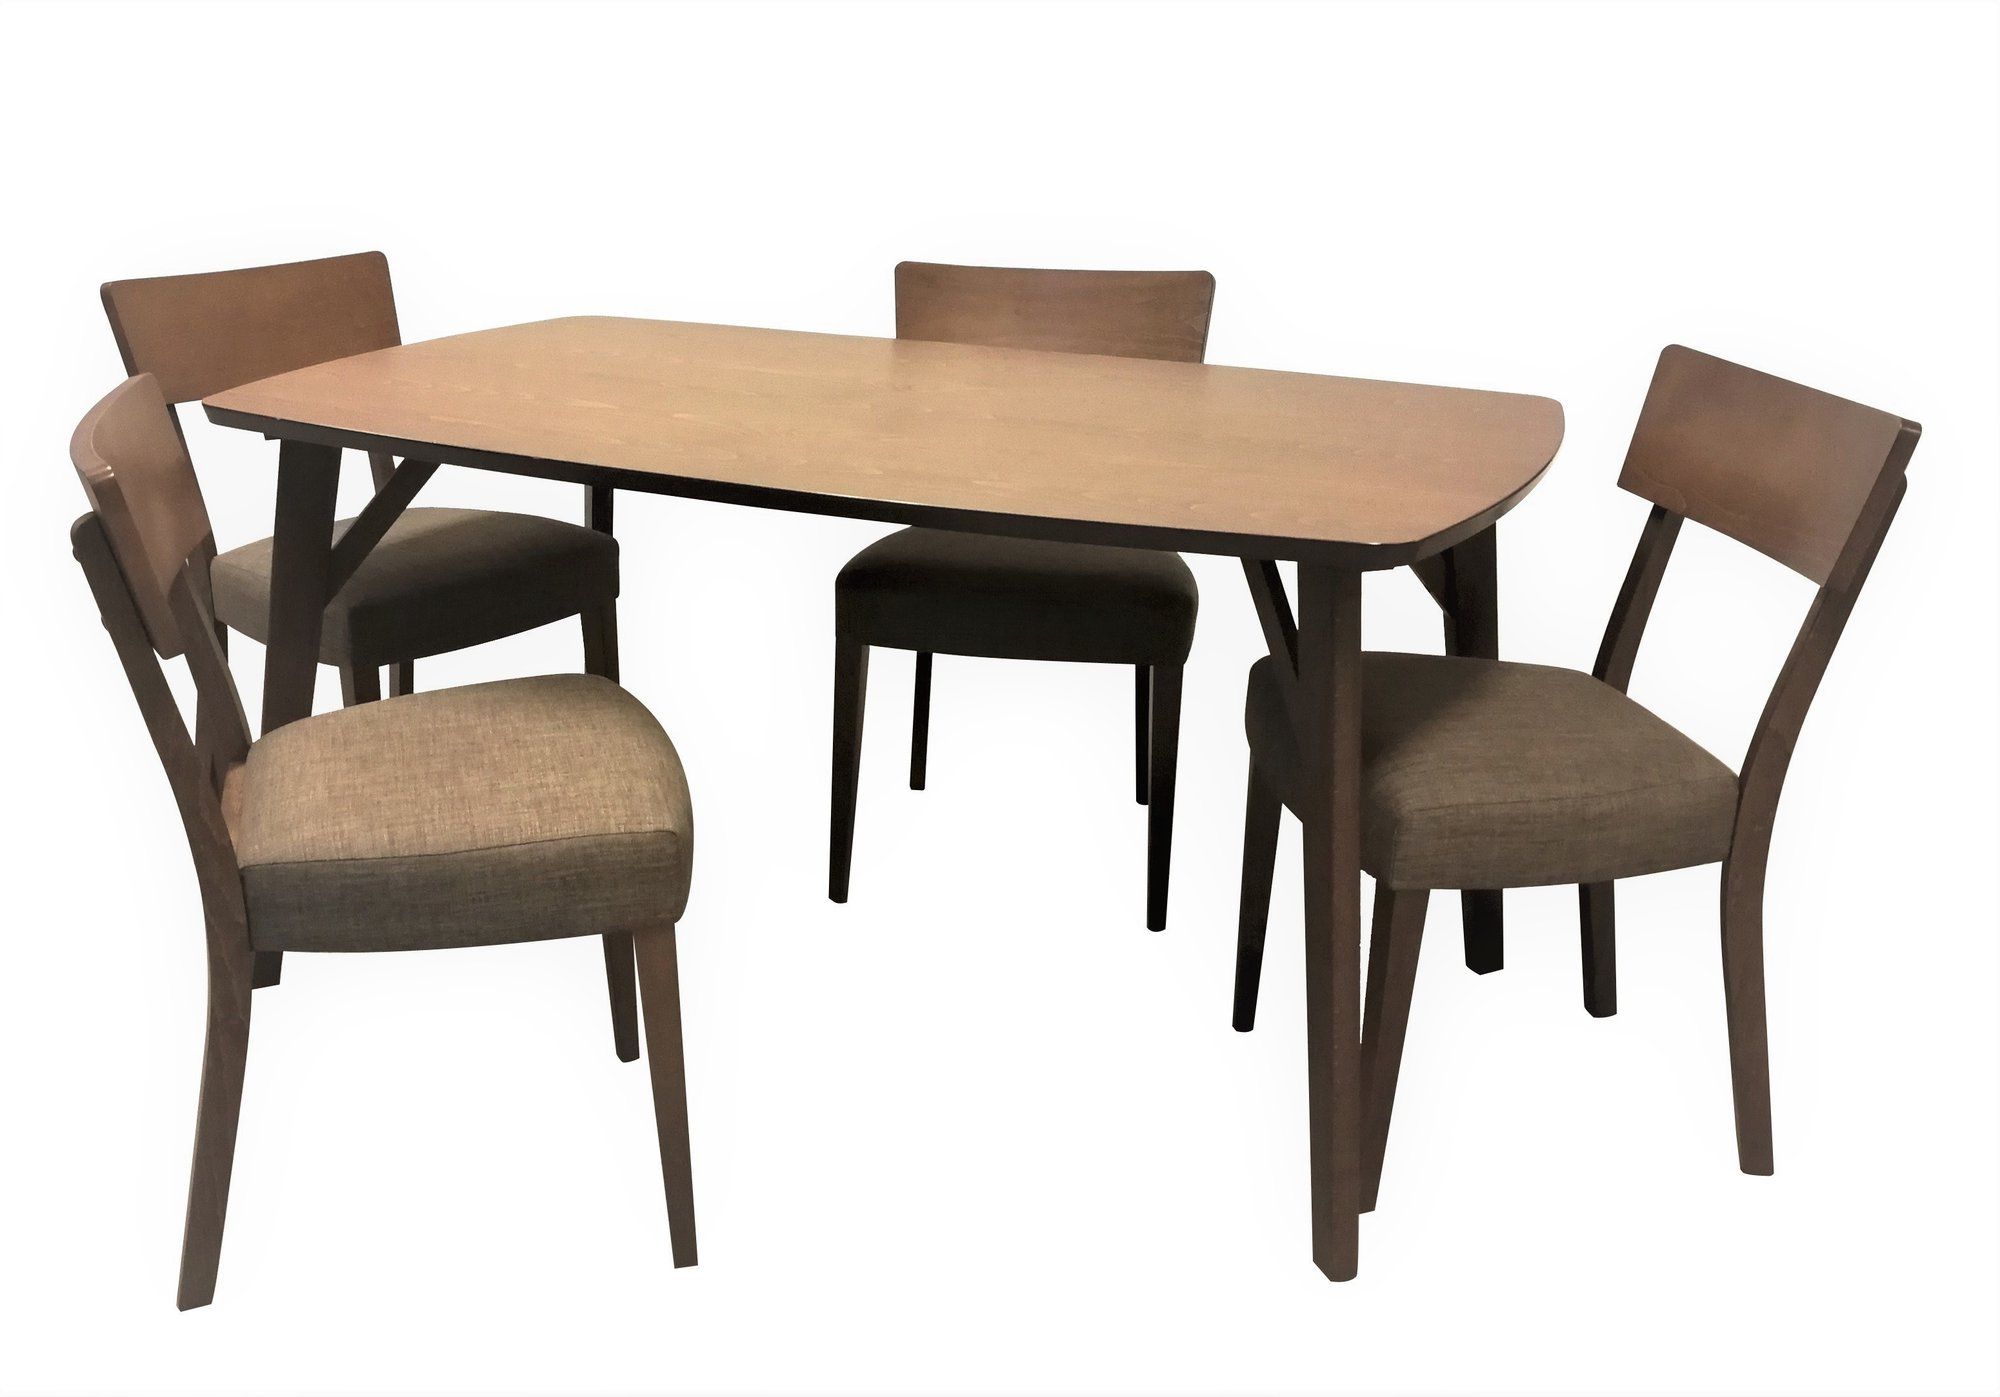 Trendy 5 Piece Breakfast Nook Dining Sets Within Details About George Oliver Crompton 5 Piece Breakfast Nook Dining Set (View 16 of 20)